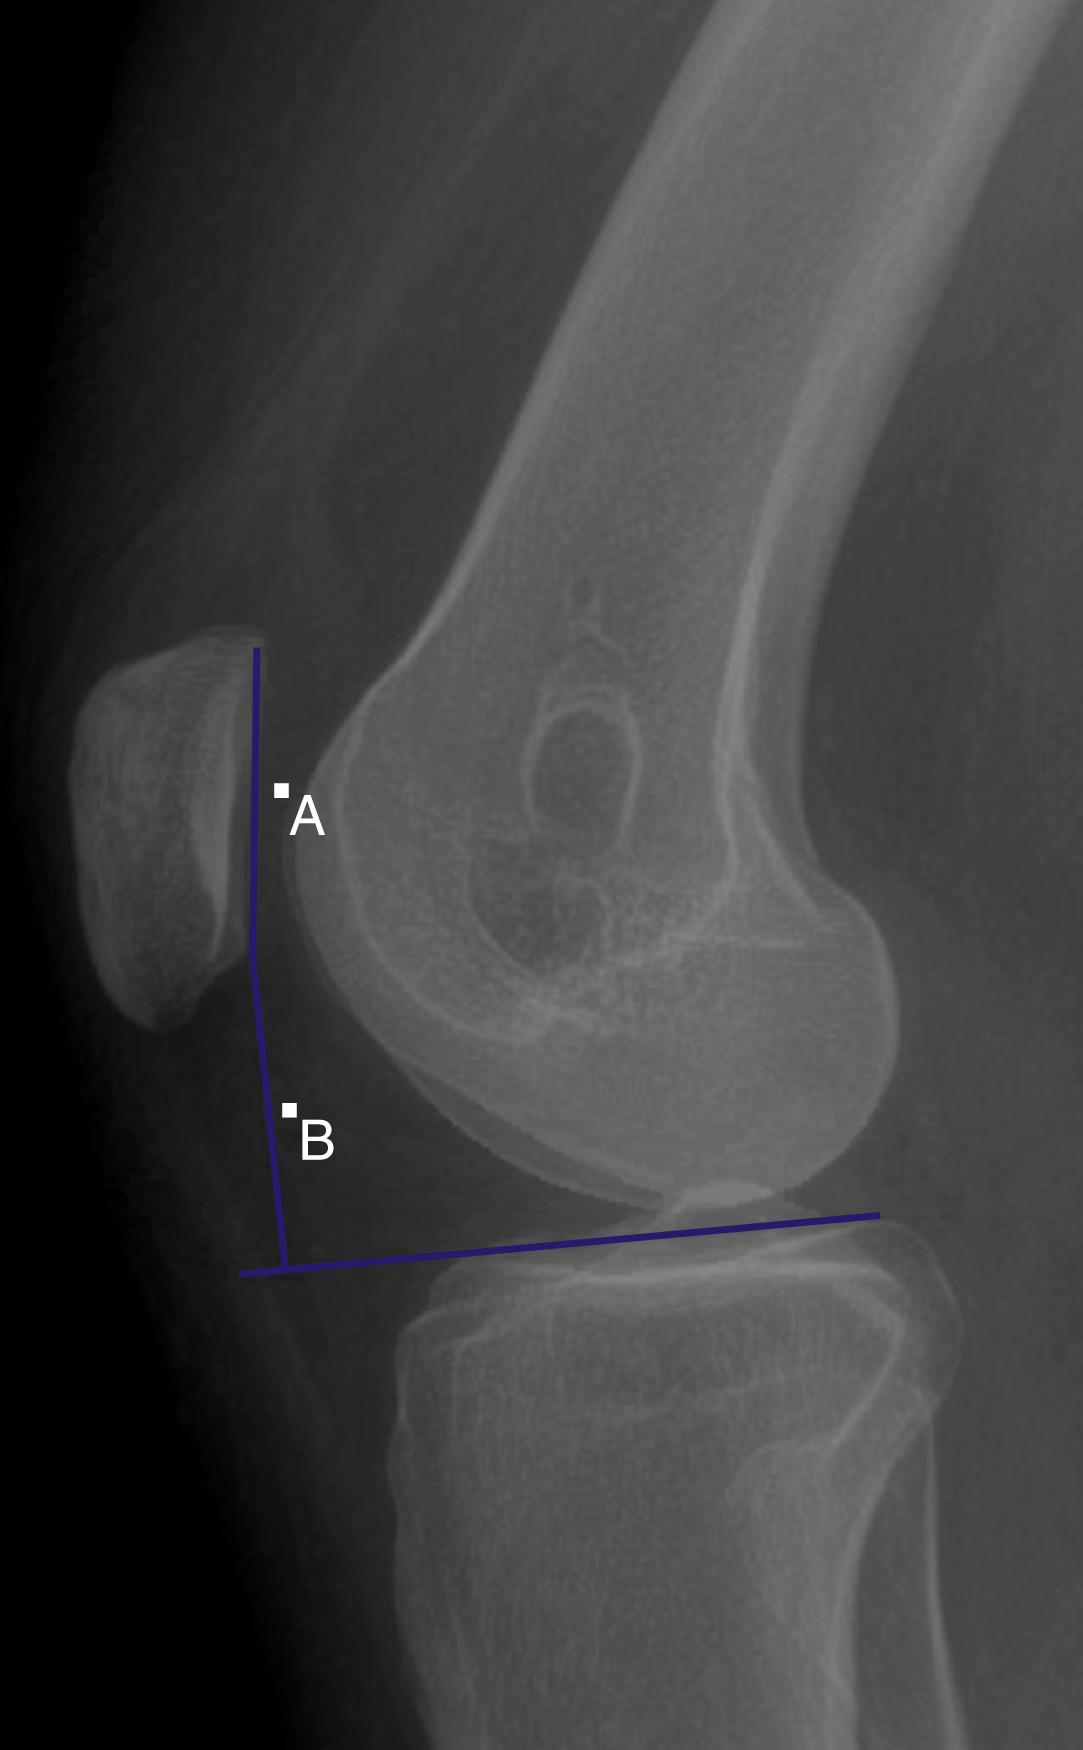 Fig. 30.3, The Blackburn-Peel Index is calculated by dividing the distance from the lower patellar articular surface to a line drawn perpendicularly from the upper tibia (line B) by the patellar articular surface length (line A) on lateral radiograph.